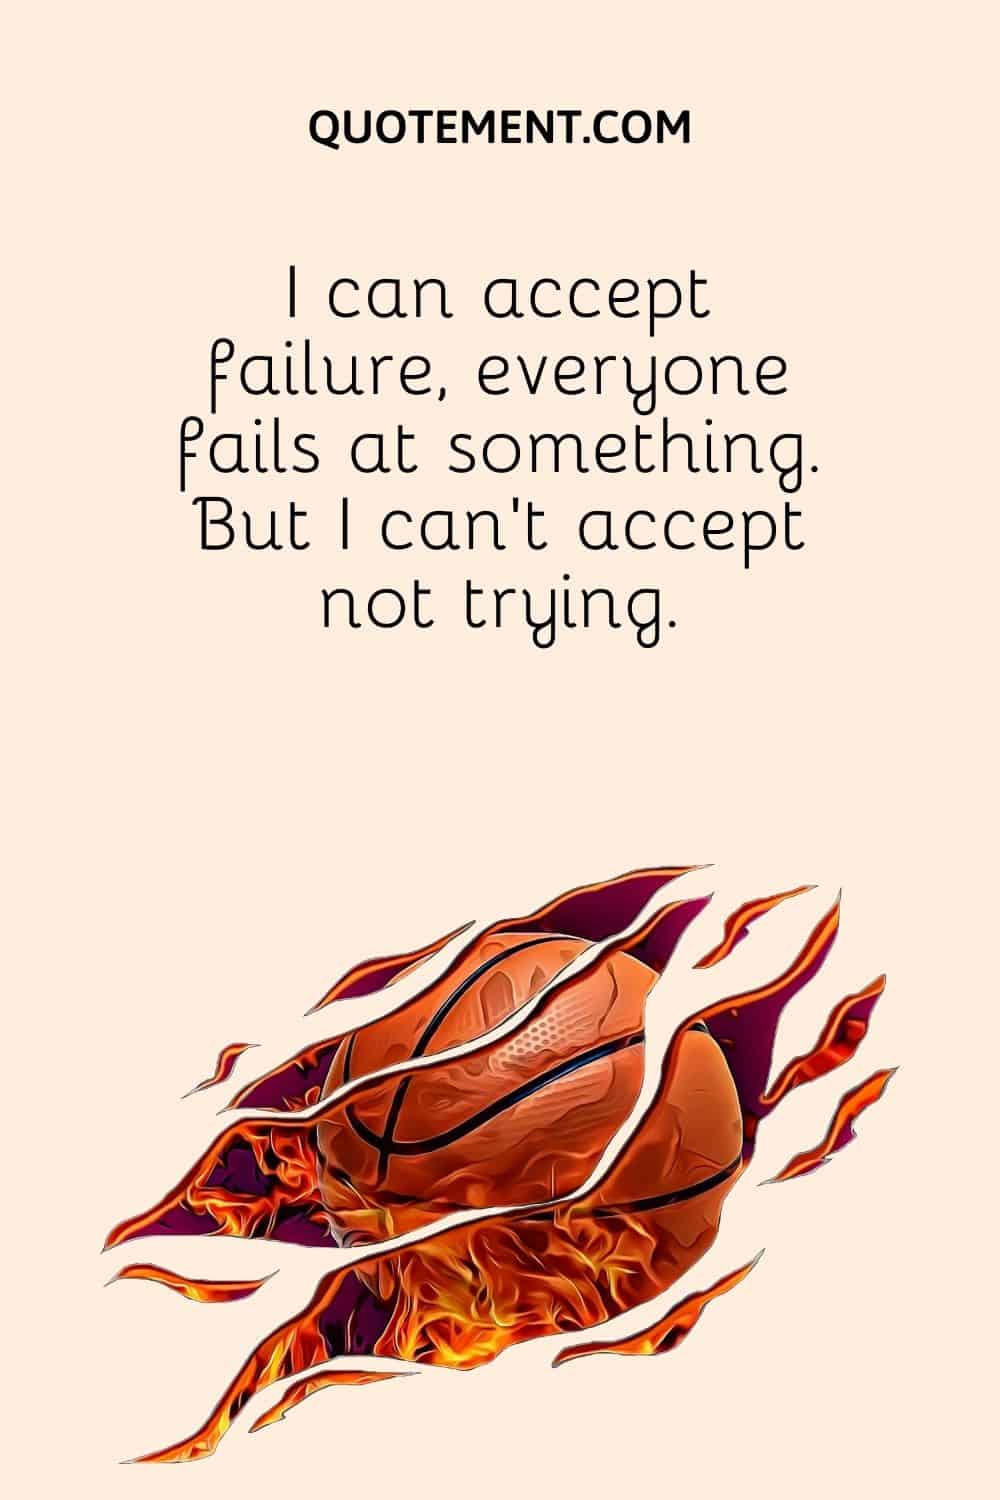 I can accept failure, everyone fails at something.